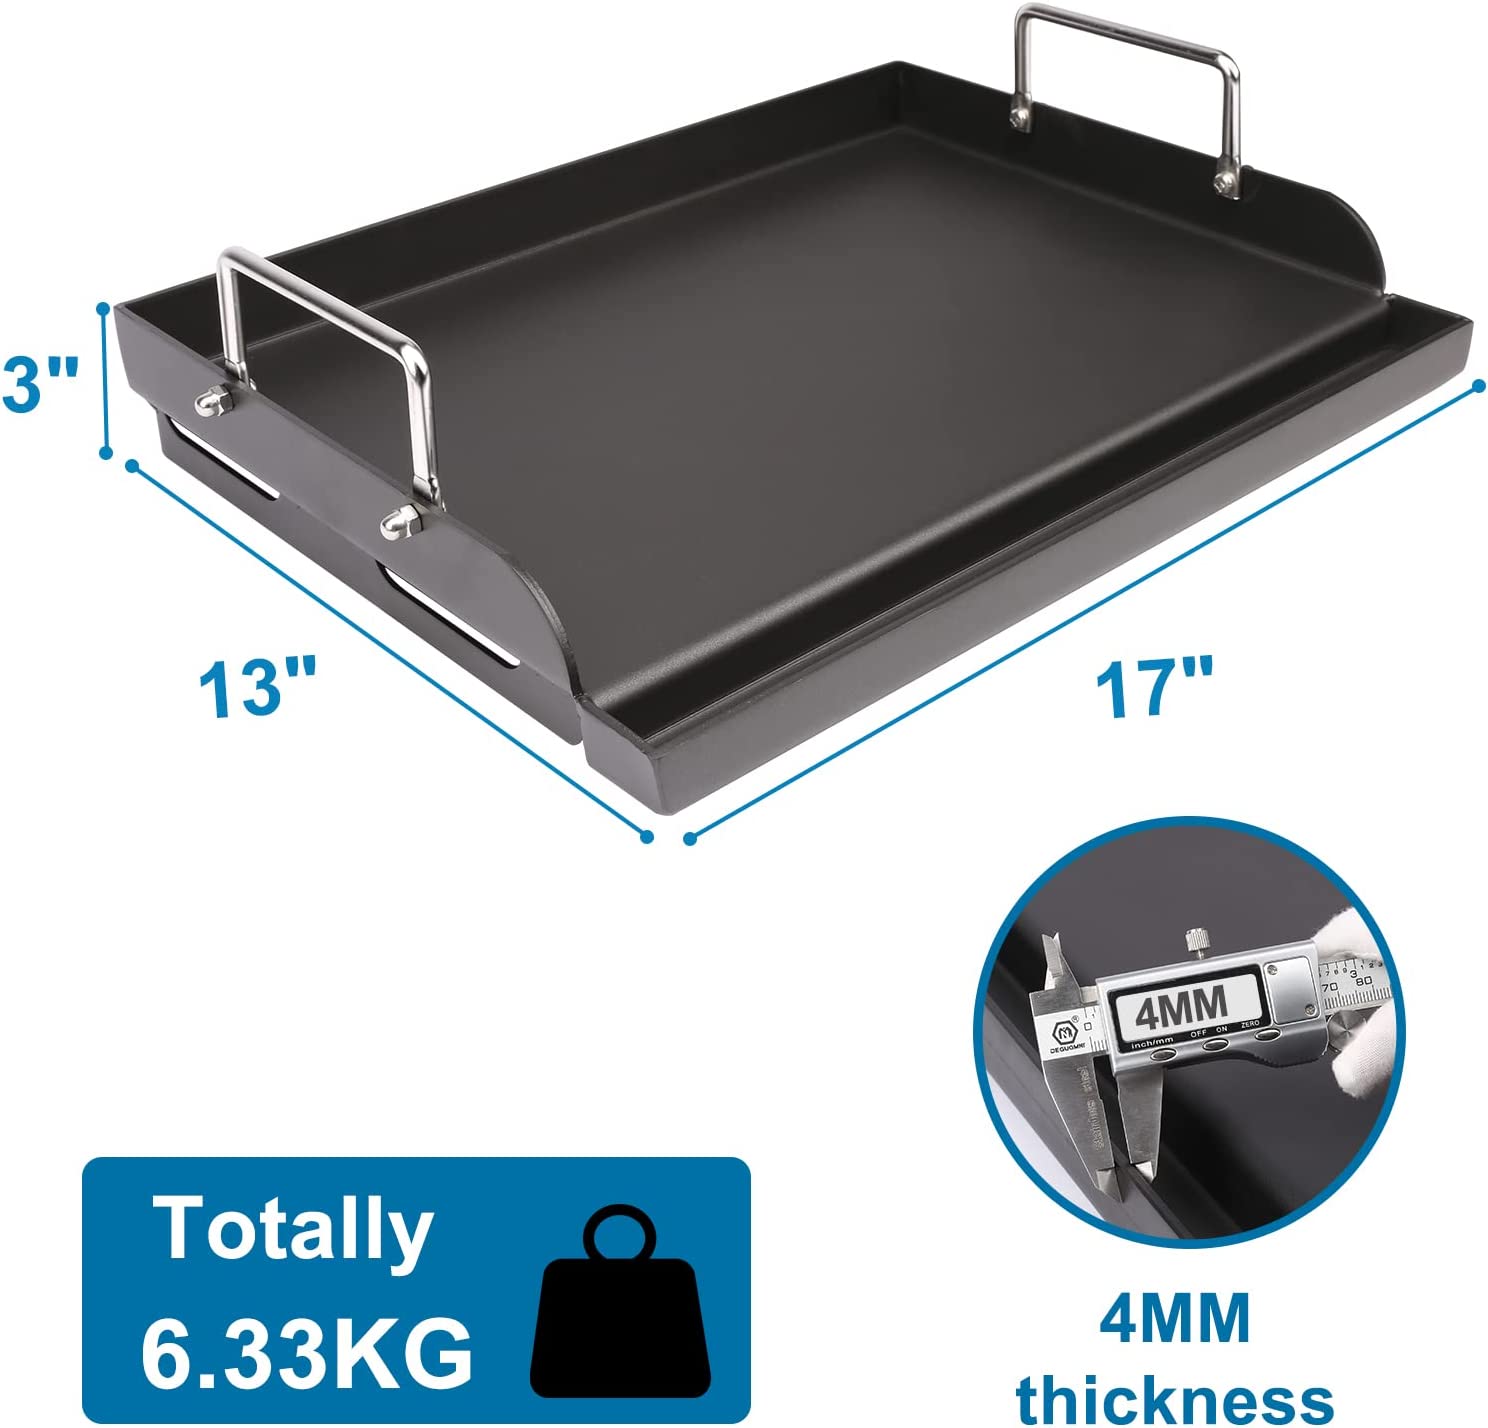  Stove Top Griddle, Flat Top Griddle for Cusimax Smokeless  Grills, Pancake Griddle Plate, Non-Stick Griddle Grill Pan, Dishwasher  Safe, Aluminum, 14.96 x 8.66: Home & Kitchen